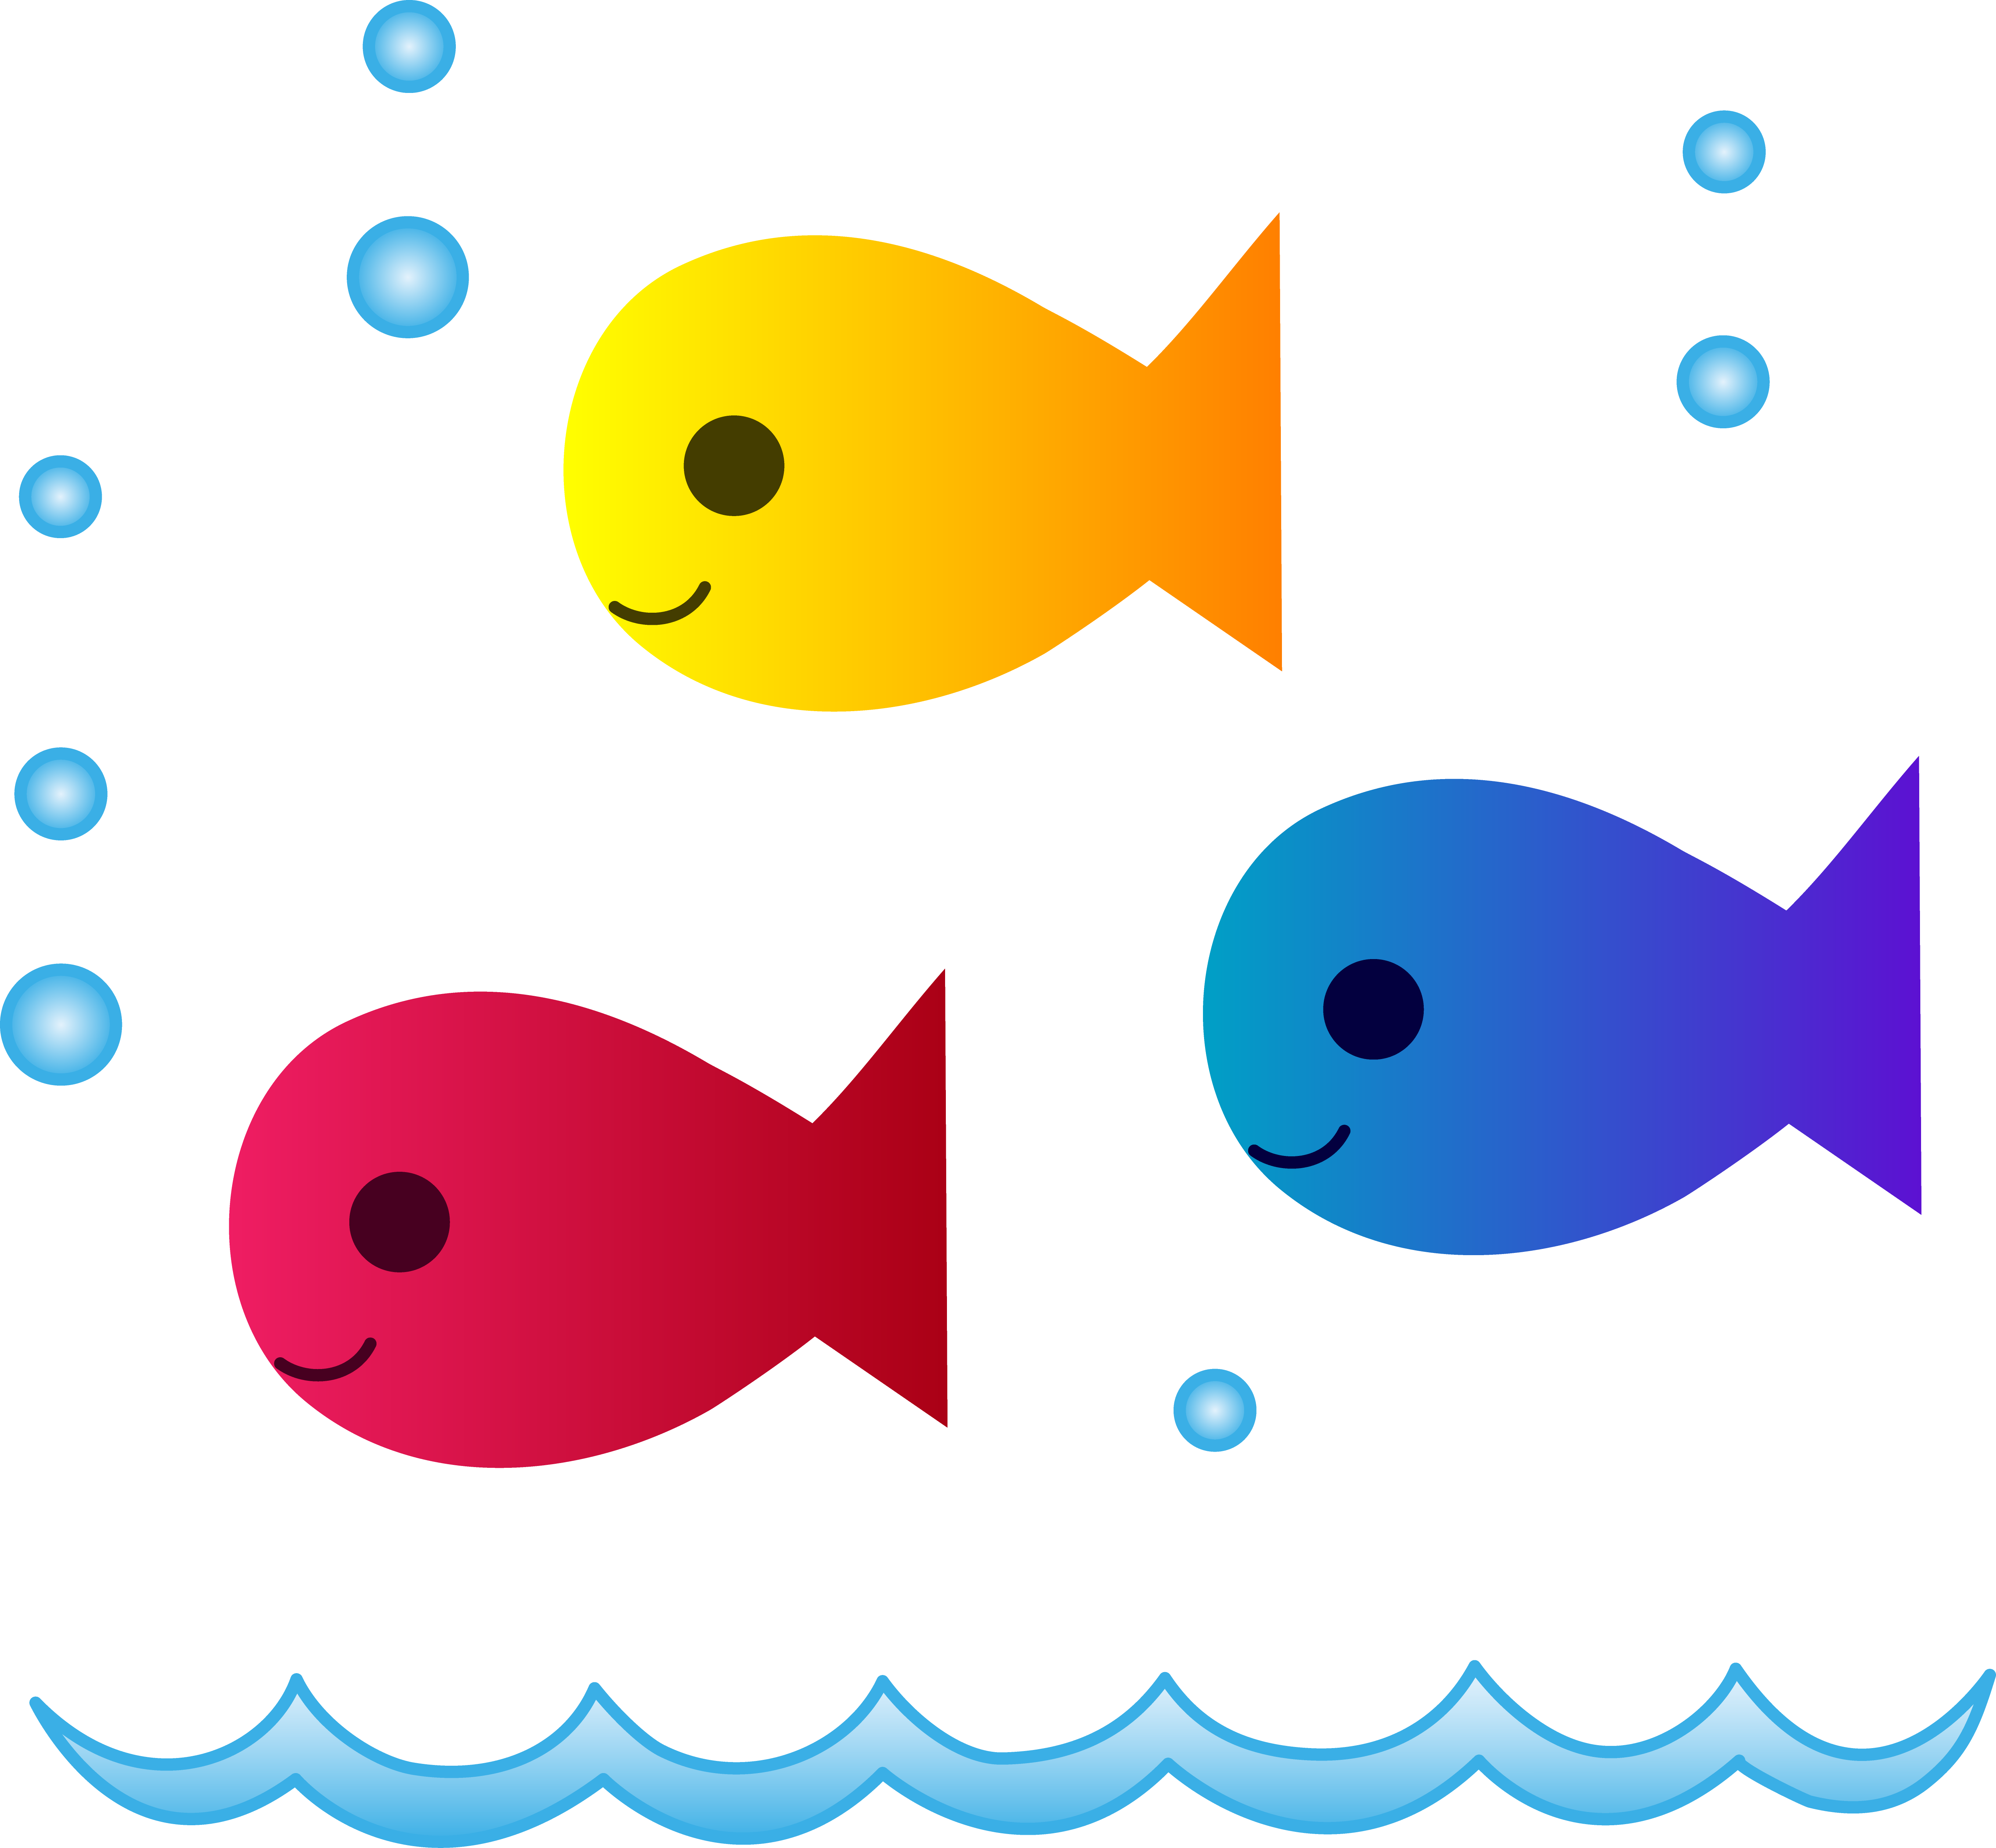 School Of Tropical Fish | Clipart Panda - Free Clipart Images